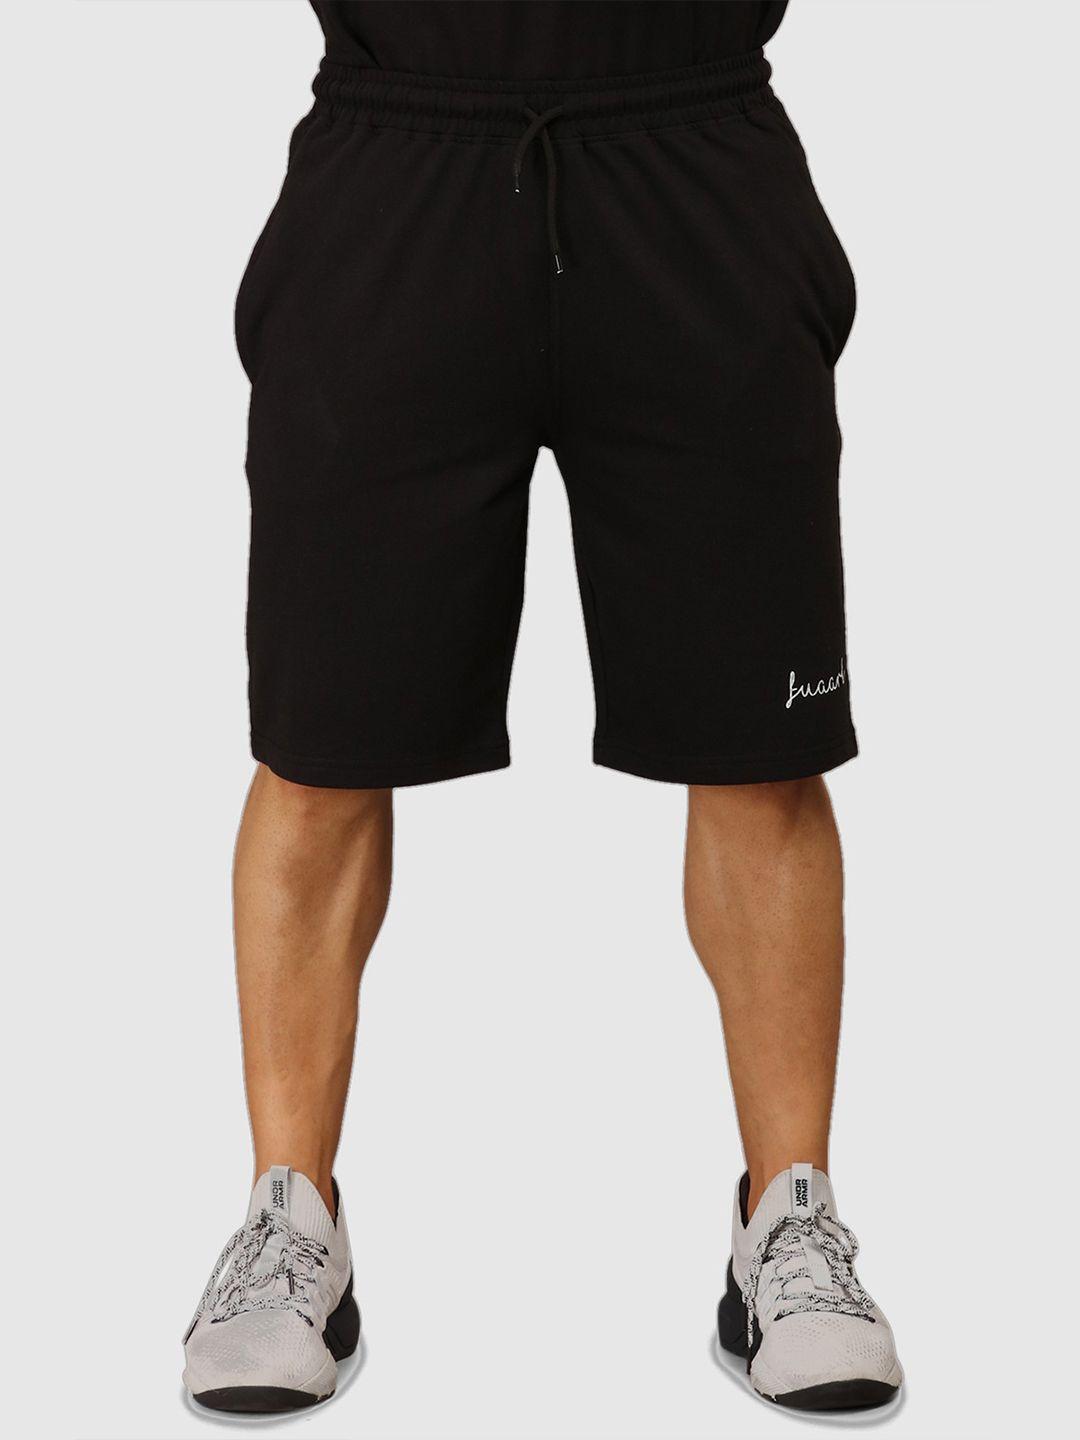 fuaark-men-black-loose-fit-training-or-gym-sports-shorts